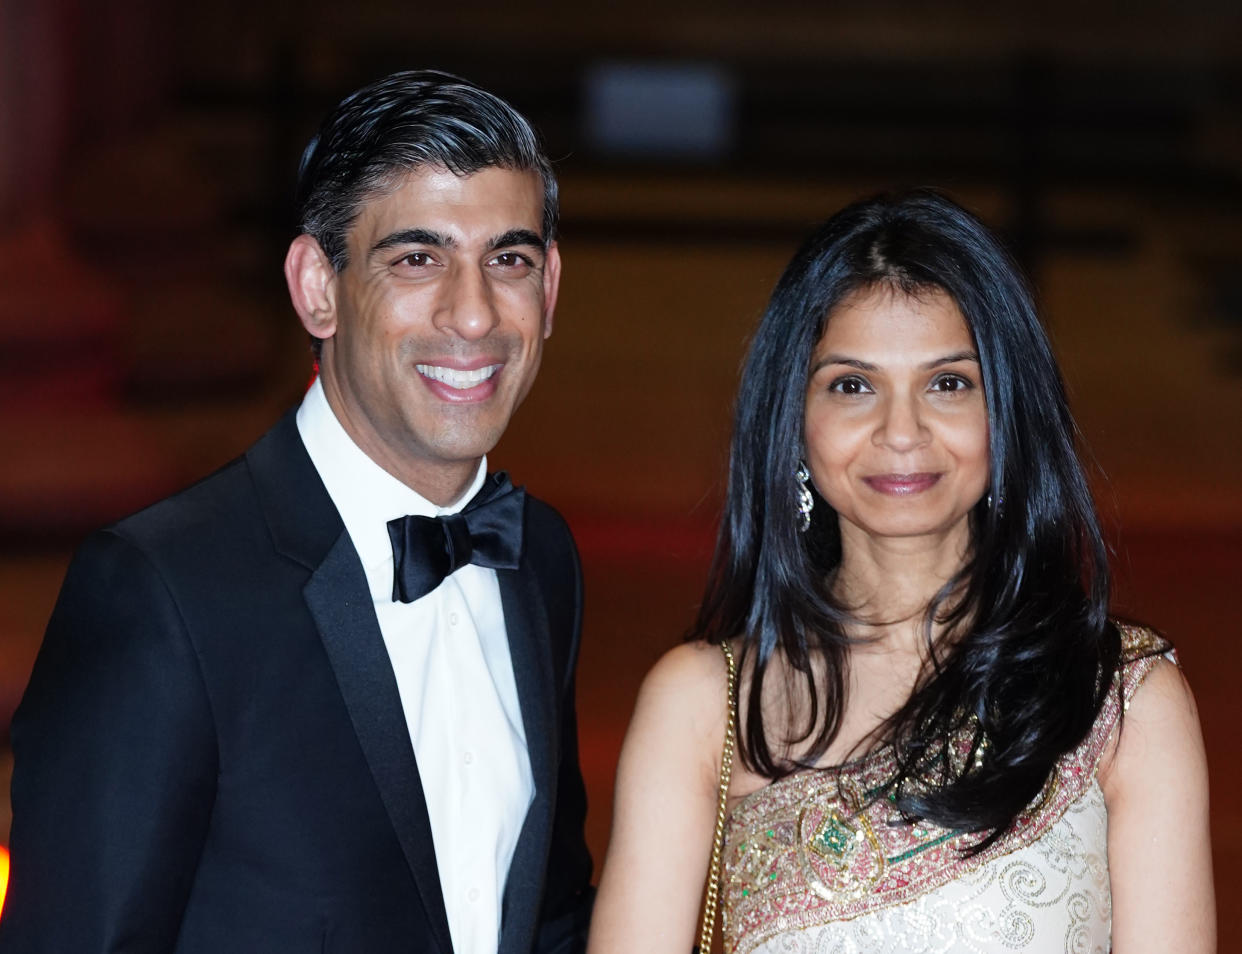 File photo dated 09/02/22 of Chancellor of the Exchequer Rishi Sunak alongside his wife Akshata Murthy. It has today been announced that Rishi Sunak is the new Conservative party leader and will become the next Prime Minister. Issue date: Monday October 24, 2022.